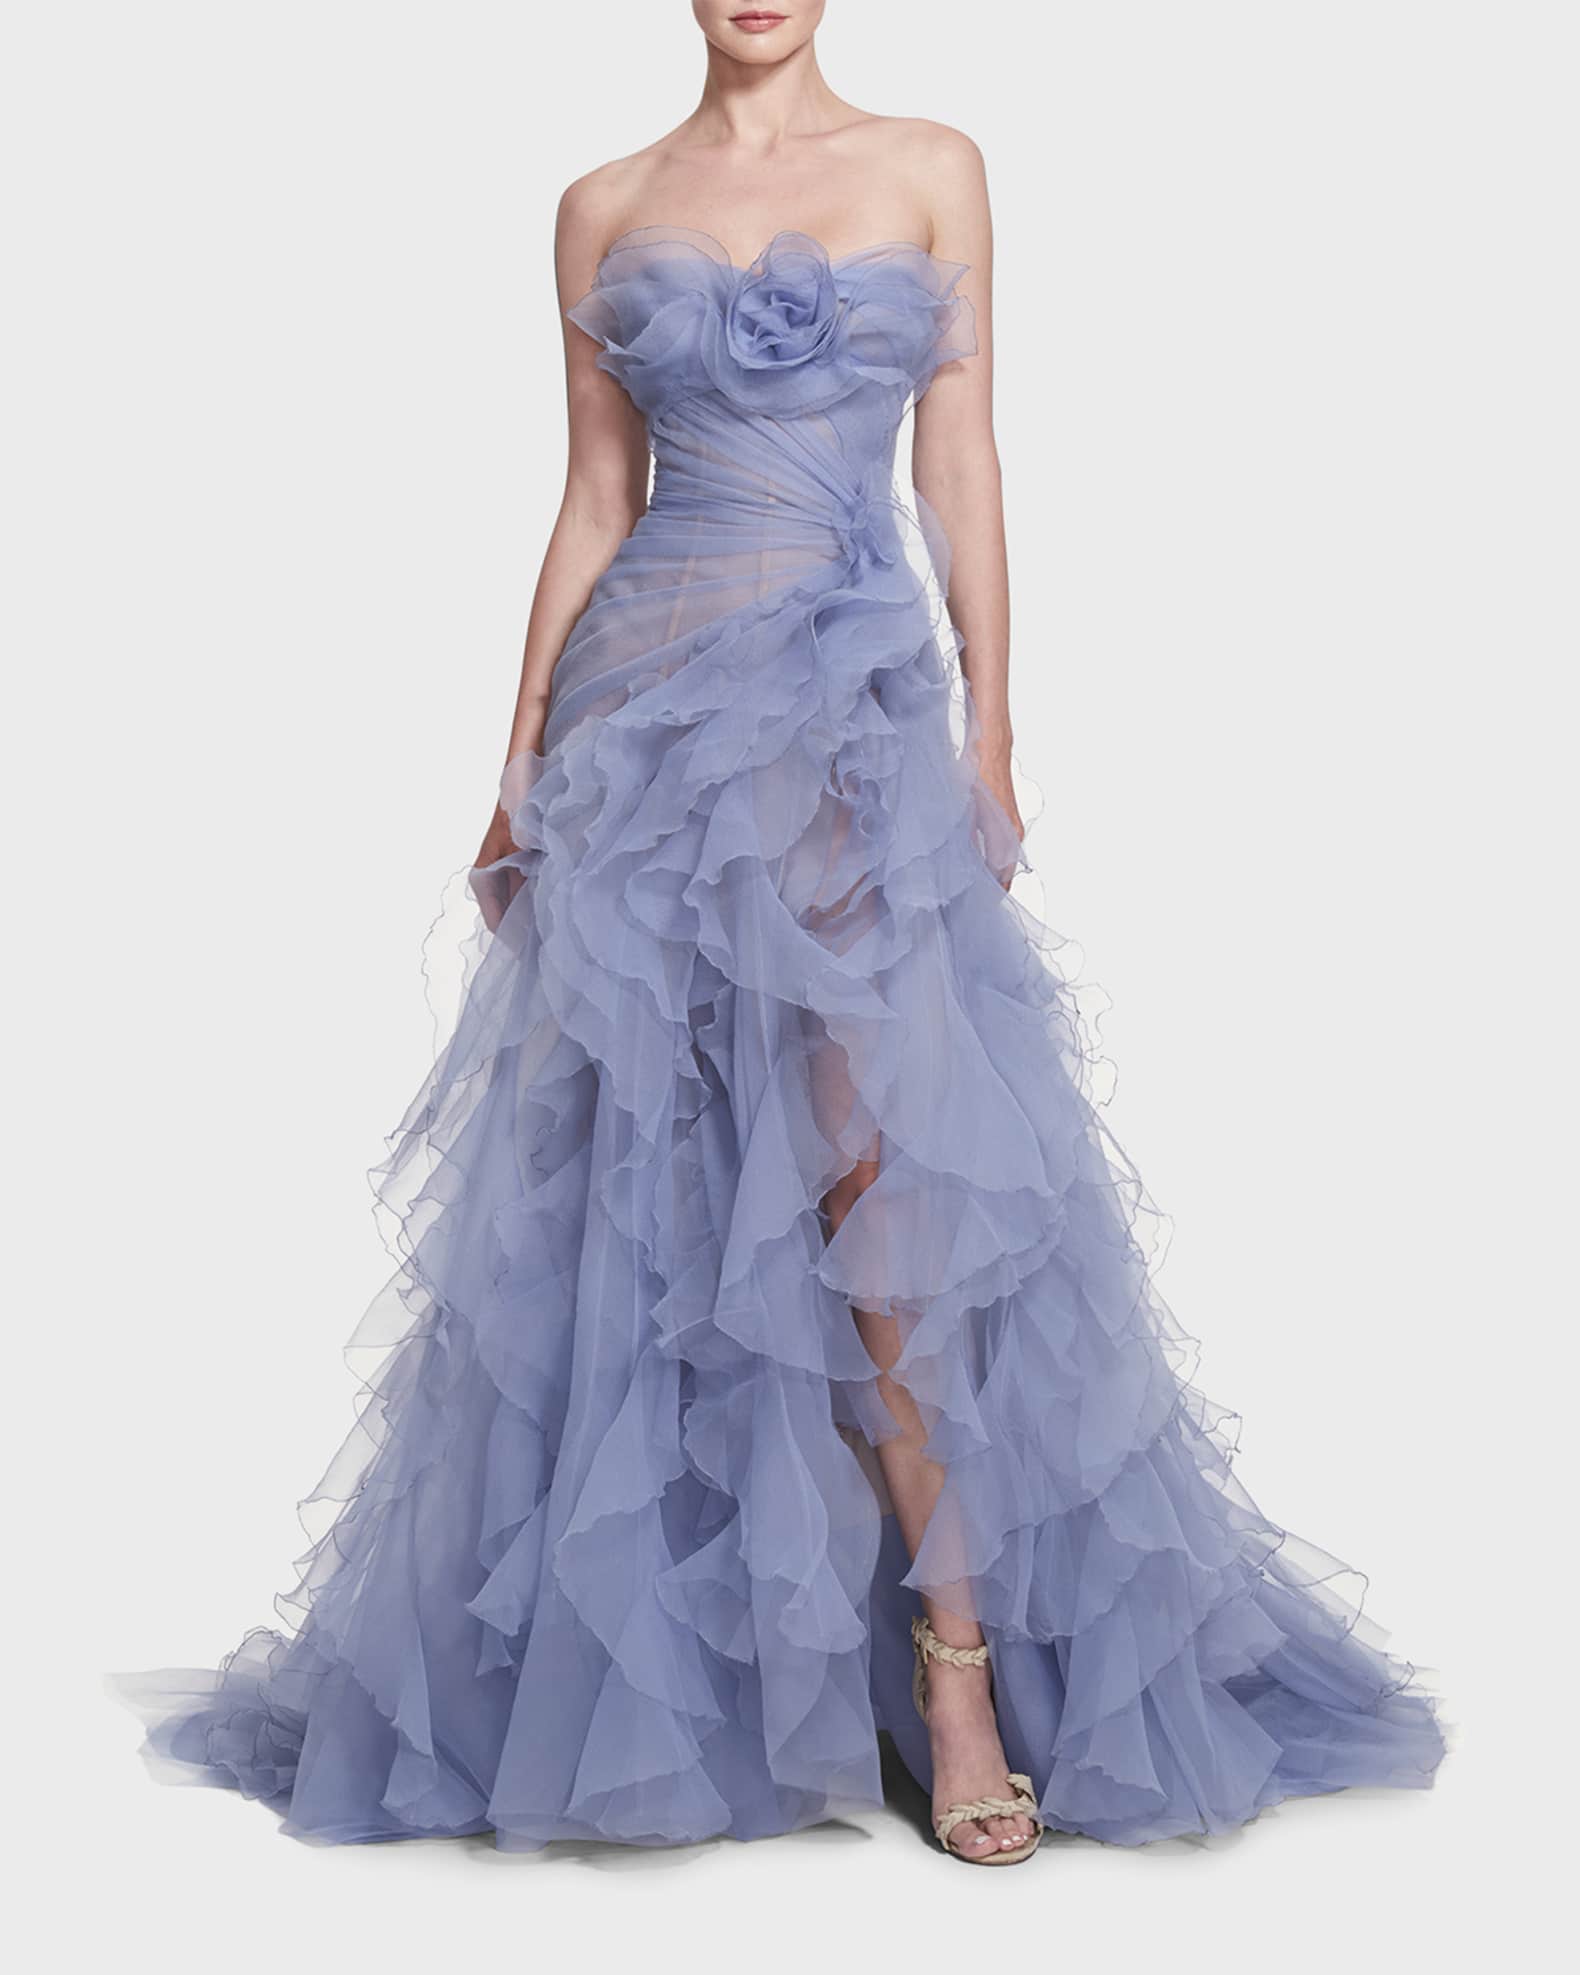 Textured Organza Ball Gown with Floral Draped Details  0